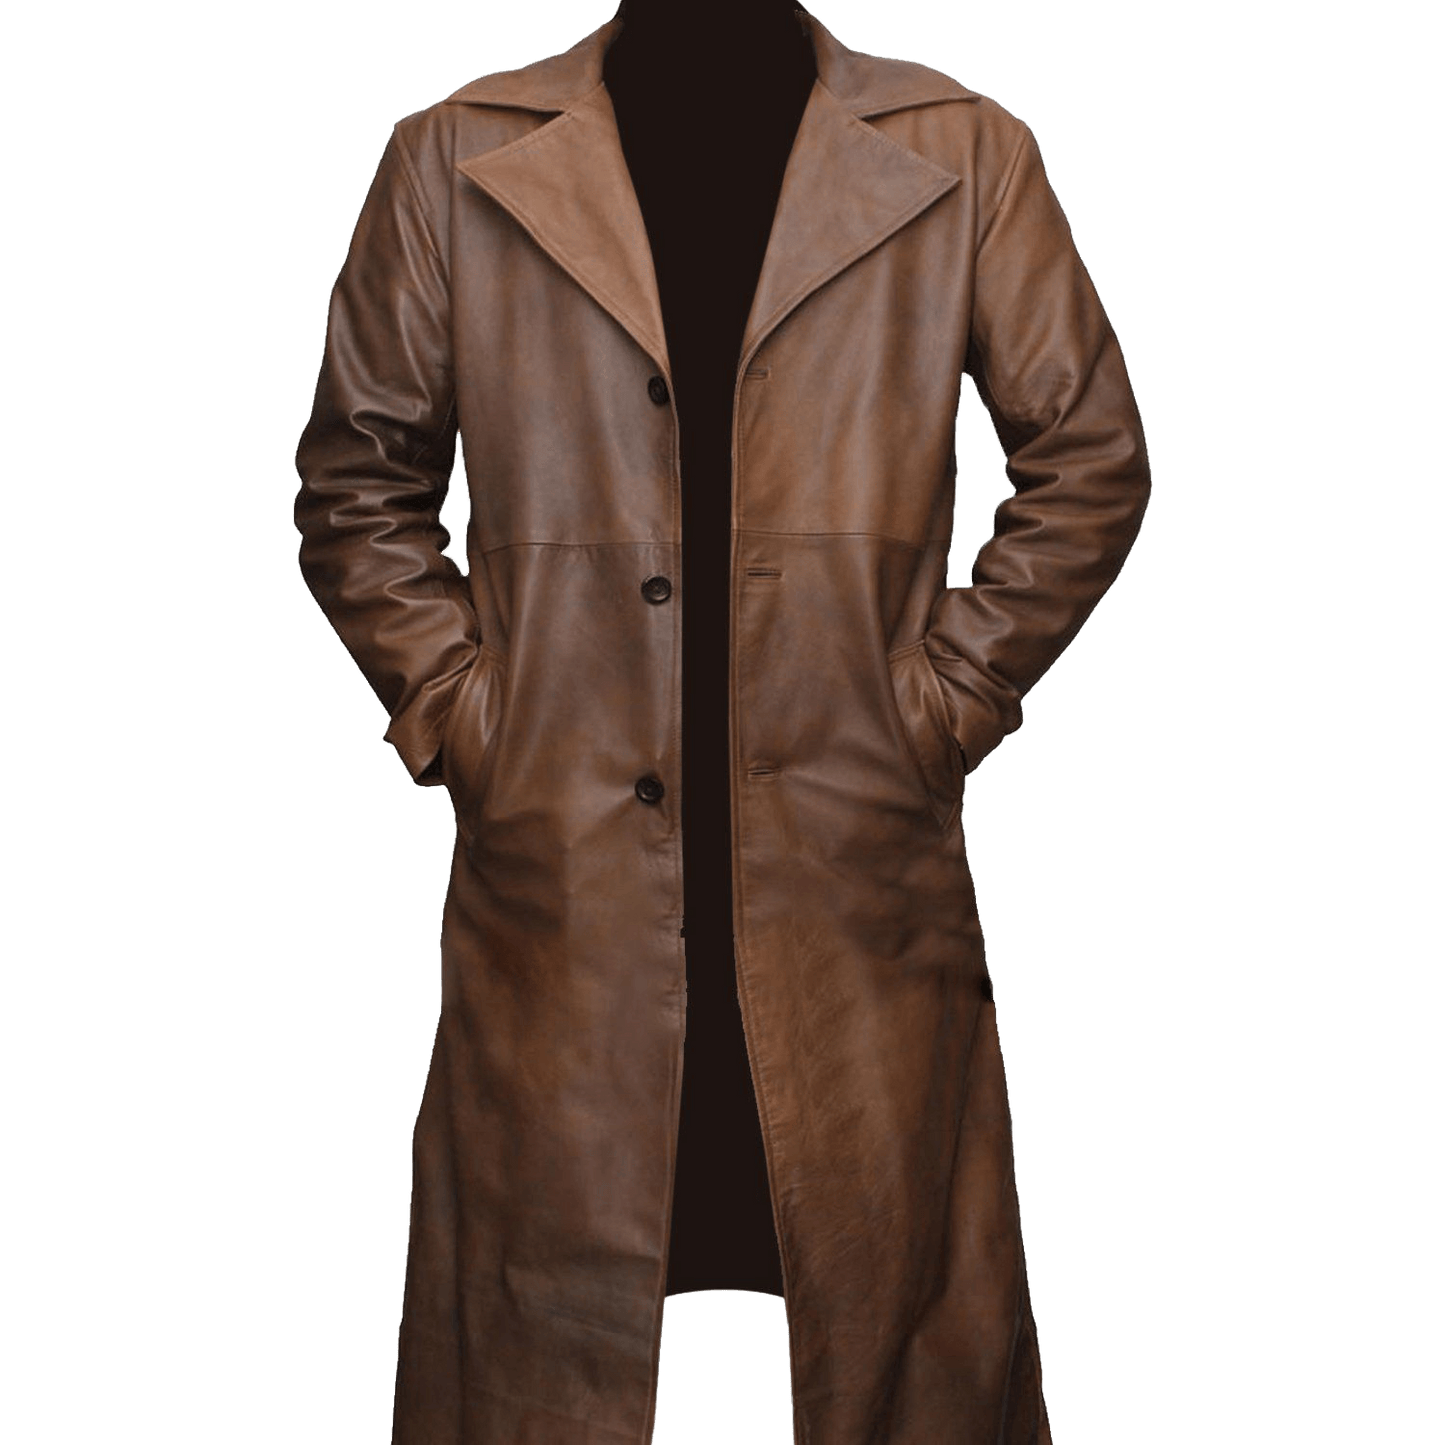 Men’s Waxed Brown Genuine Leather Trench Coat | Mens Waxed Brown Leather Trench Coat - Button Stitched